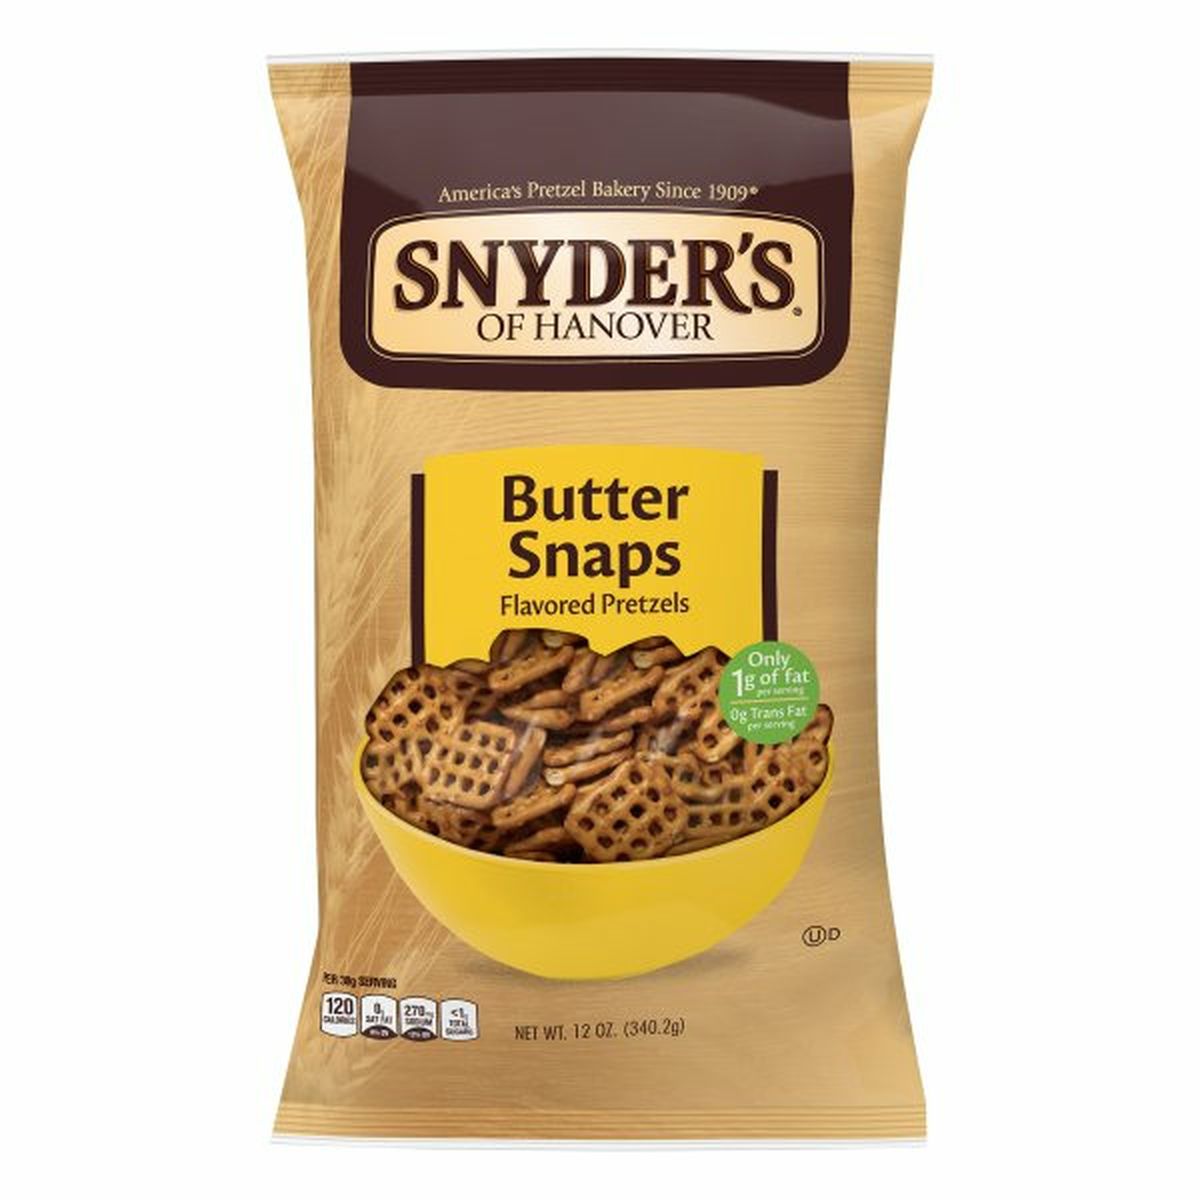 Calories in Snyder's of Hanovers Flavored Pretzels, Butter Snaps